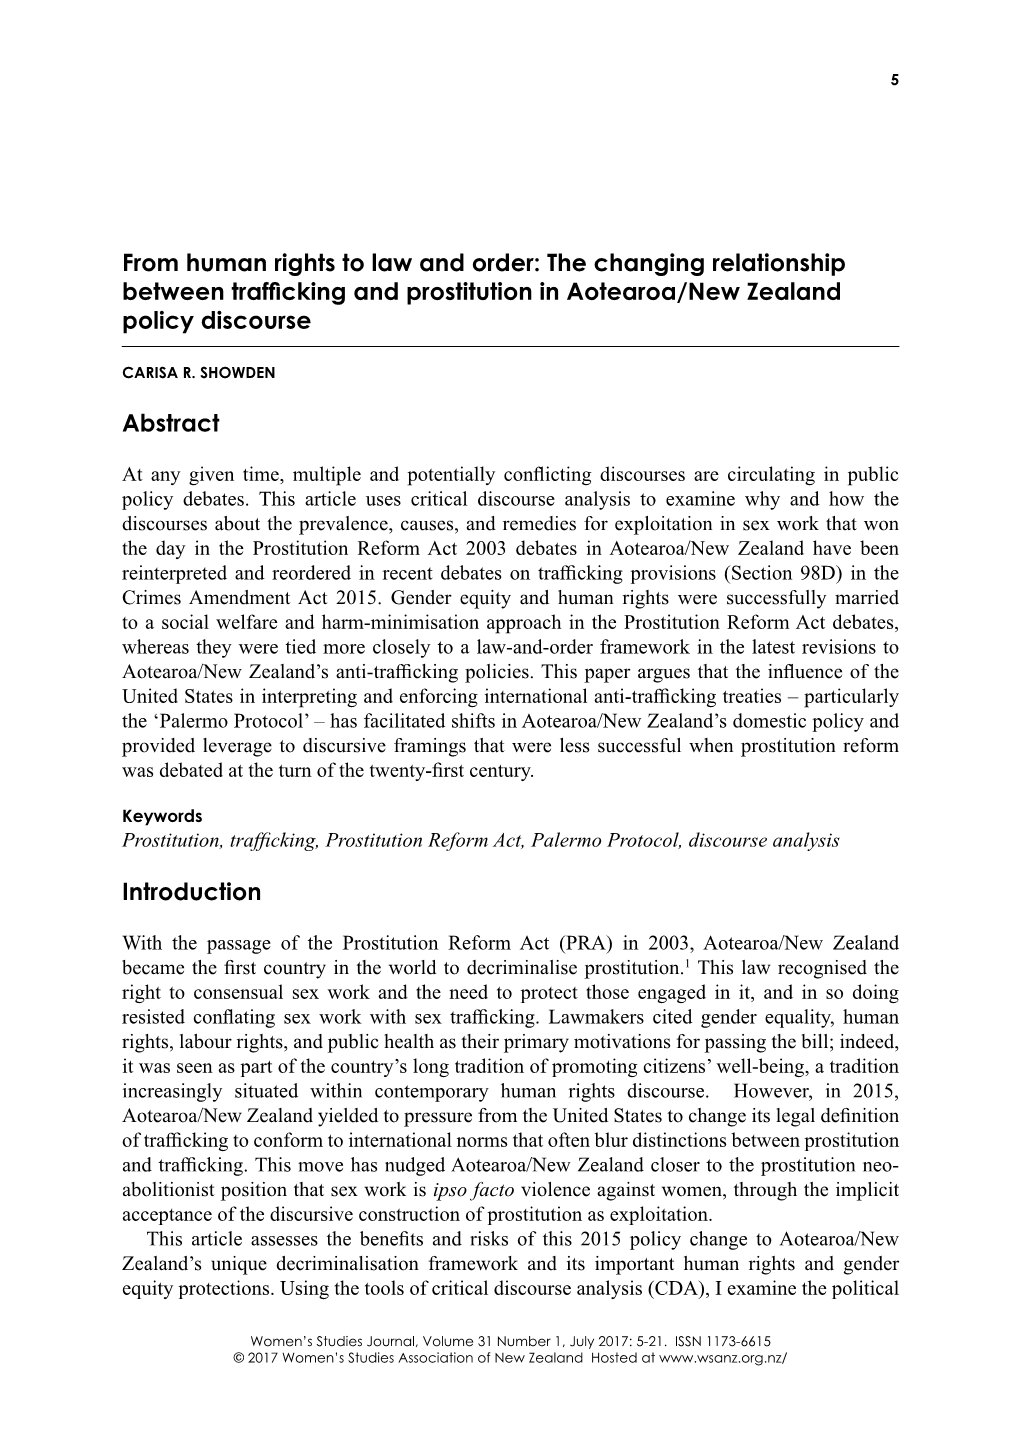 From Human Rights to Law and Order: the Changing Relationship Between Trafficking and Prostitution in Aotearoa/New Zealand Policy Discourse